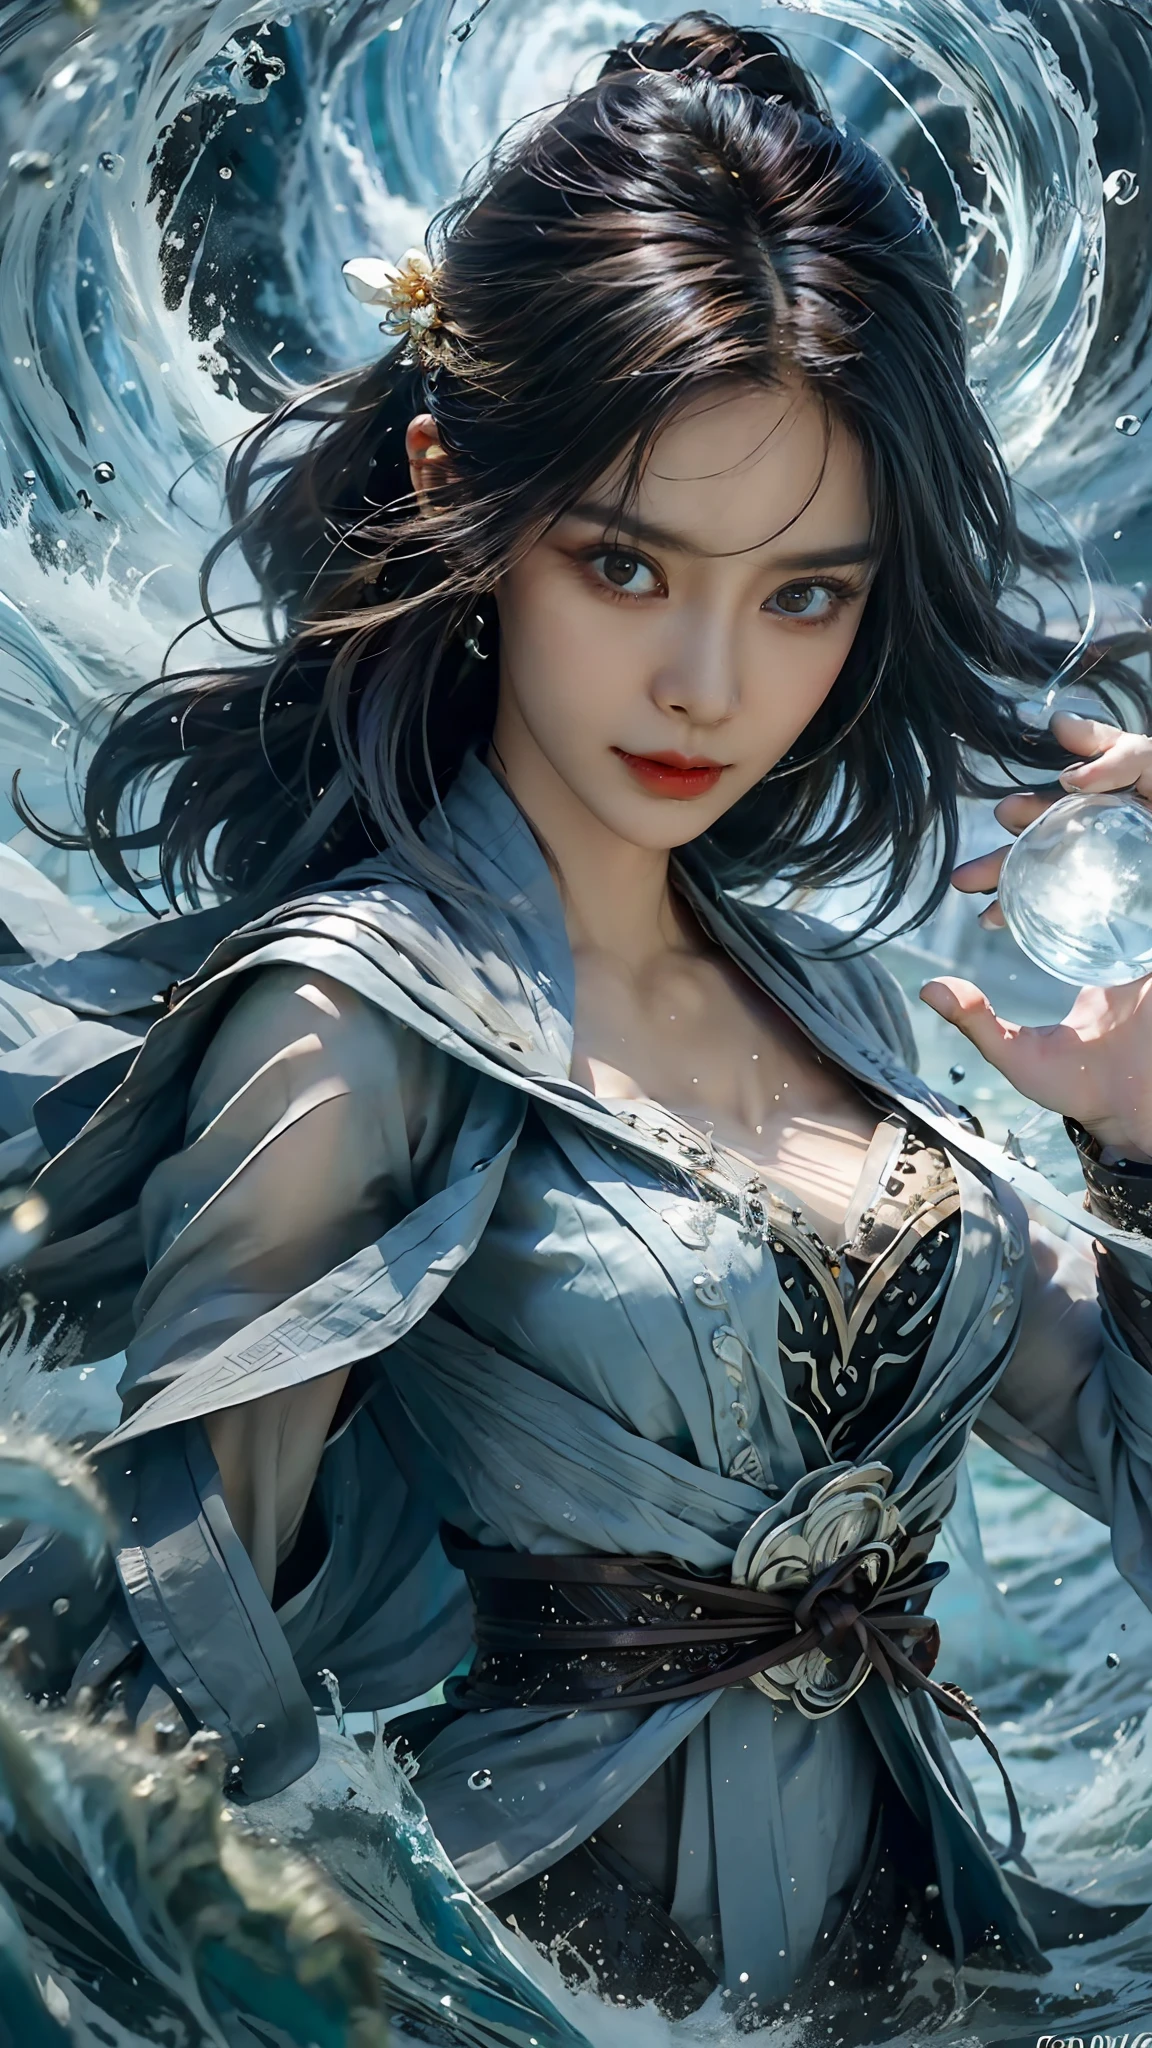 Blockbuster movies，((Ancient female general)),Detailed details，Detailed facial expressions，Detailed hands（（best qualtiy））， （（tmasterpiece））， （A detailed）， （Realistic）， （offcial art）， （Very detailed CG unity 8K wallpaper）， （Water magic：1.2）， （Mobile firepower：1.1）， （element control：1.2）， （graceful movements：1.1）， （Aquatic beauty：1.2）， （Mysterious powers：1.2）， （Serene expression：1.1）， （Flowing tides：1.2）， （Sparkling water droplets：1.2）， （magic aura：1.1）， （magic incantation：1.2）， （Ripple waves：1.2）， （Brilliant flame formation：1.1）， （Emerges from a whirlpool of water：1.2）， （Resonate with nature：1.2），（commanding the elements：1.2），（translucent veils：1.1），（Wisdom and strength：1.2），（swirls of magic：1.2），（Glowing zigzag：1.1），（Harmony with the sea：1.2），（Mysterious origins：1.2），（harmonious balance：1.1），（The power of tranquility：1.2），（A fascinating spectacle：1.2），（Immerse yourself in liquid magic：1.1），（Embrace her destiny：1.2）Reality，Ultra-high resolution